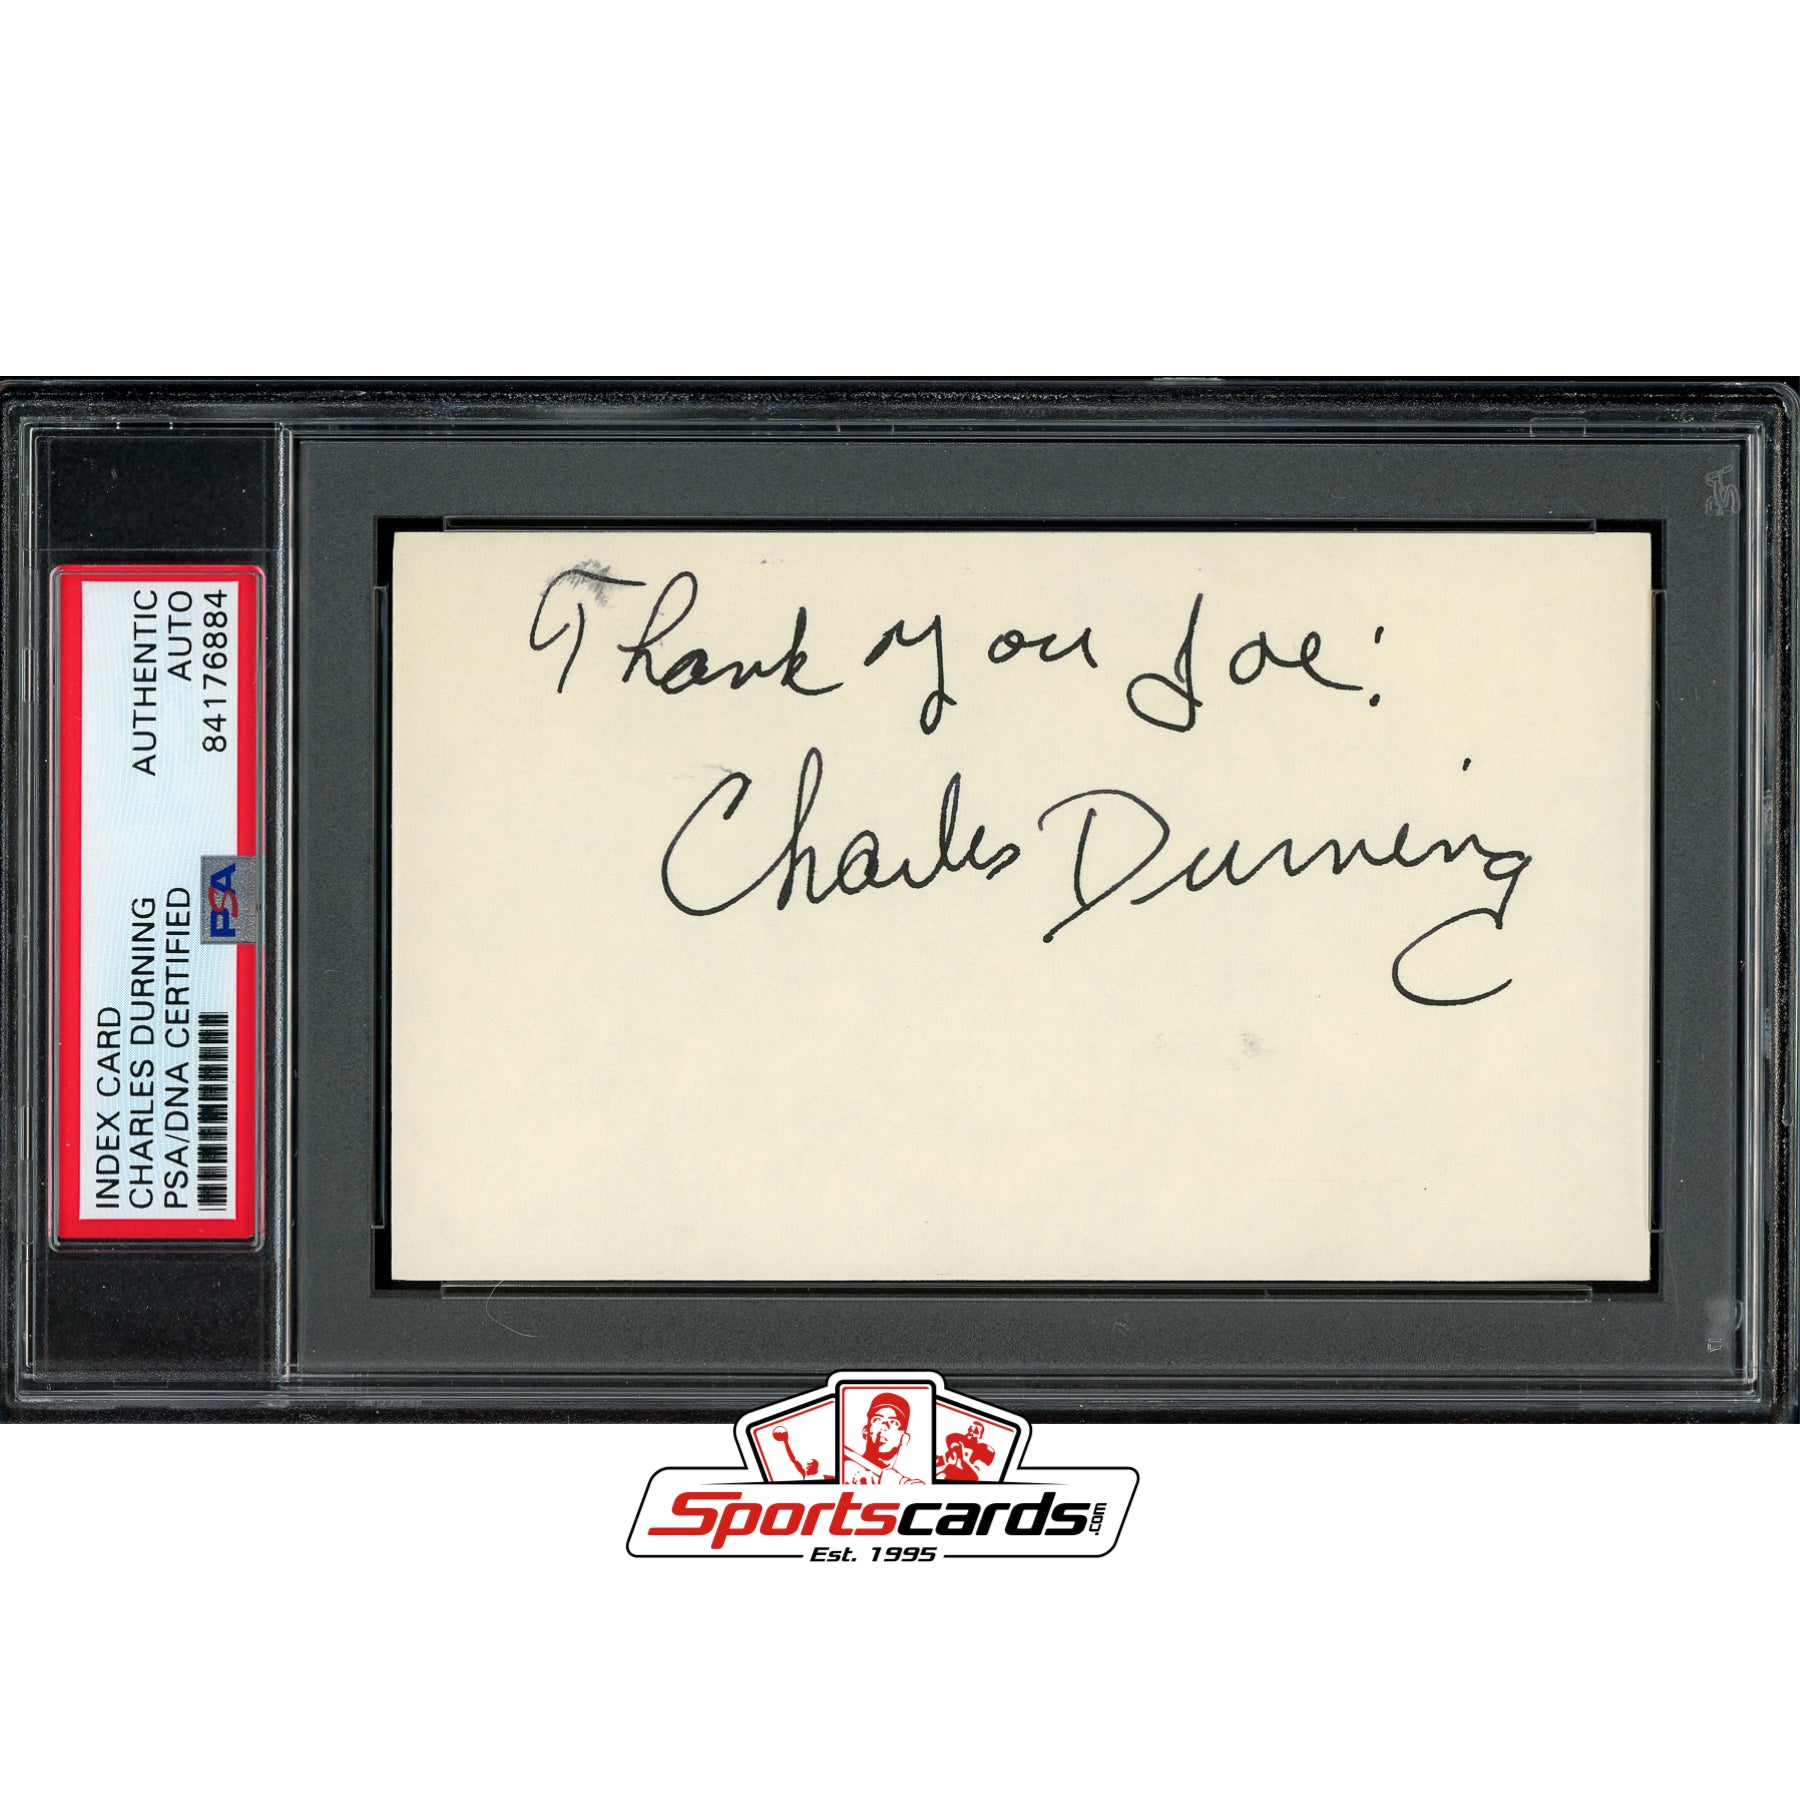 Charles Durning (d.2012) Signed Auto 3x5 Index Card PSA/DNA Actor